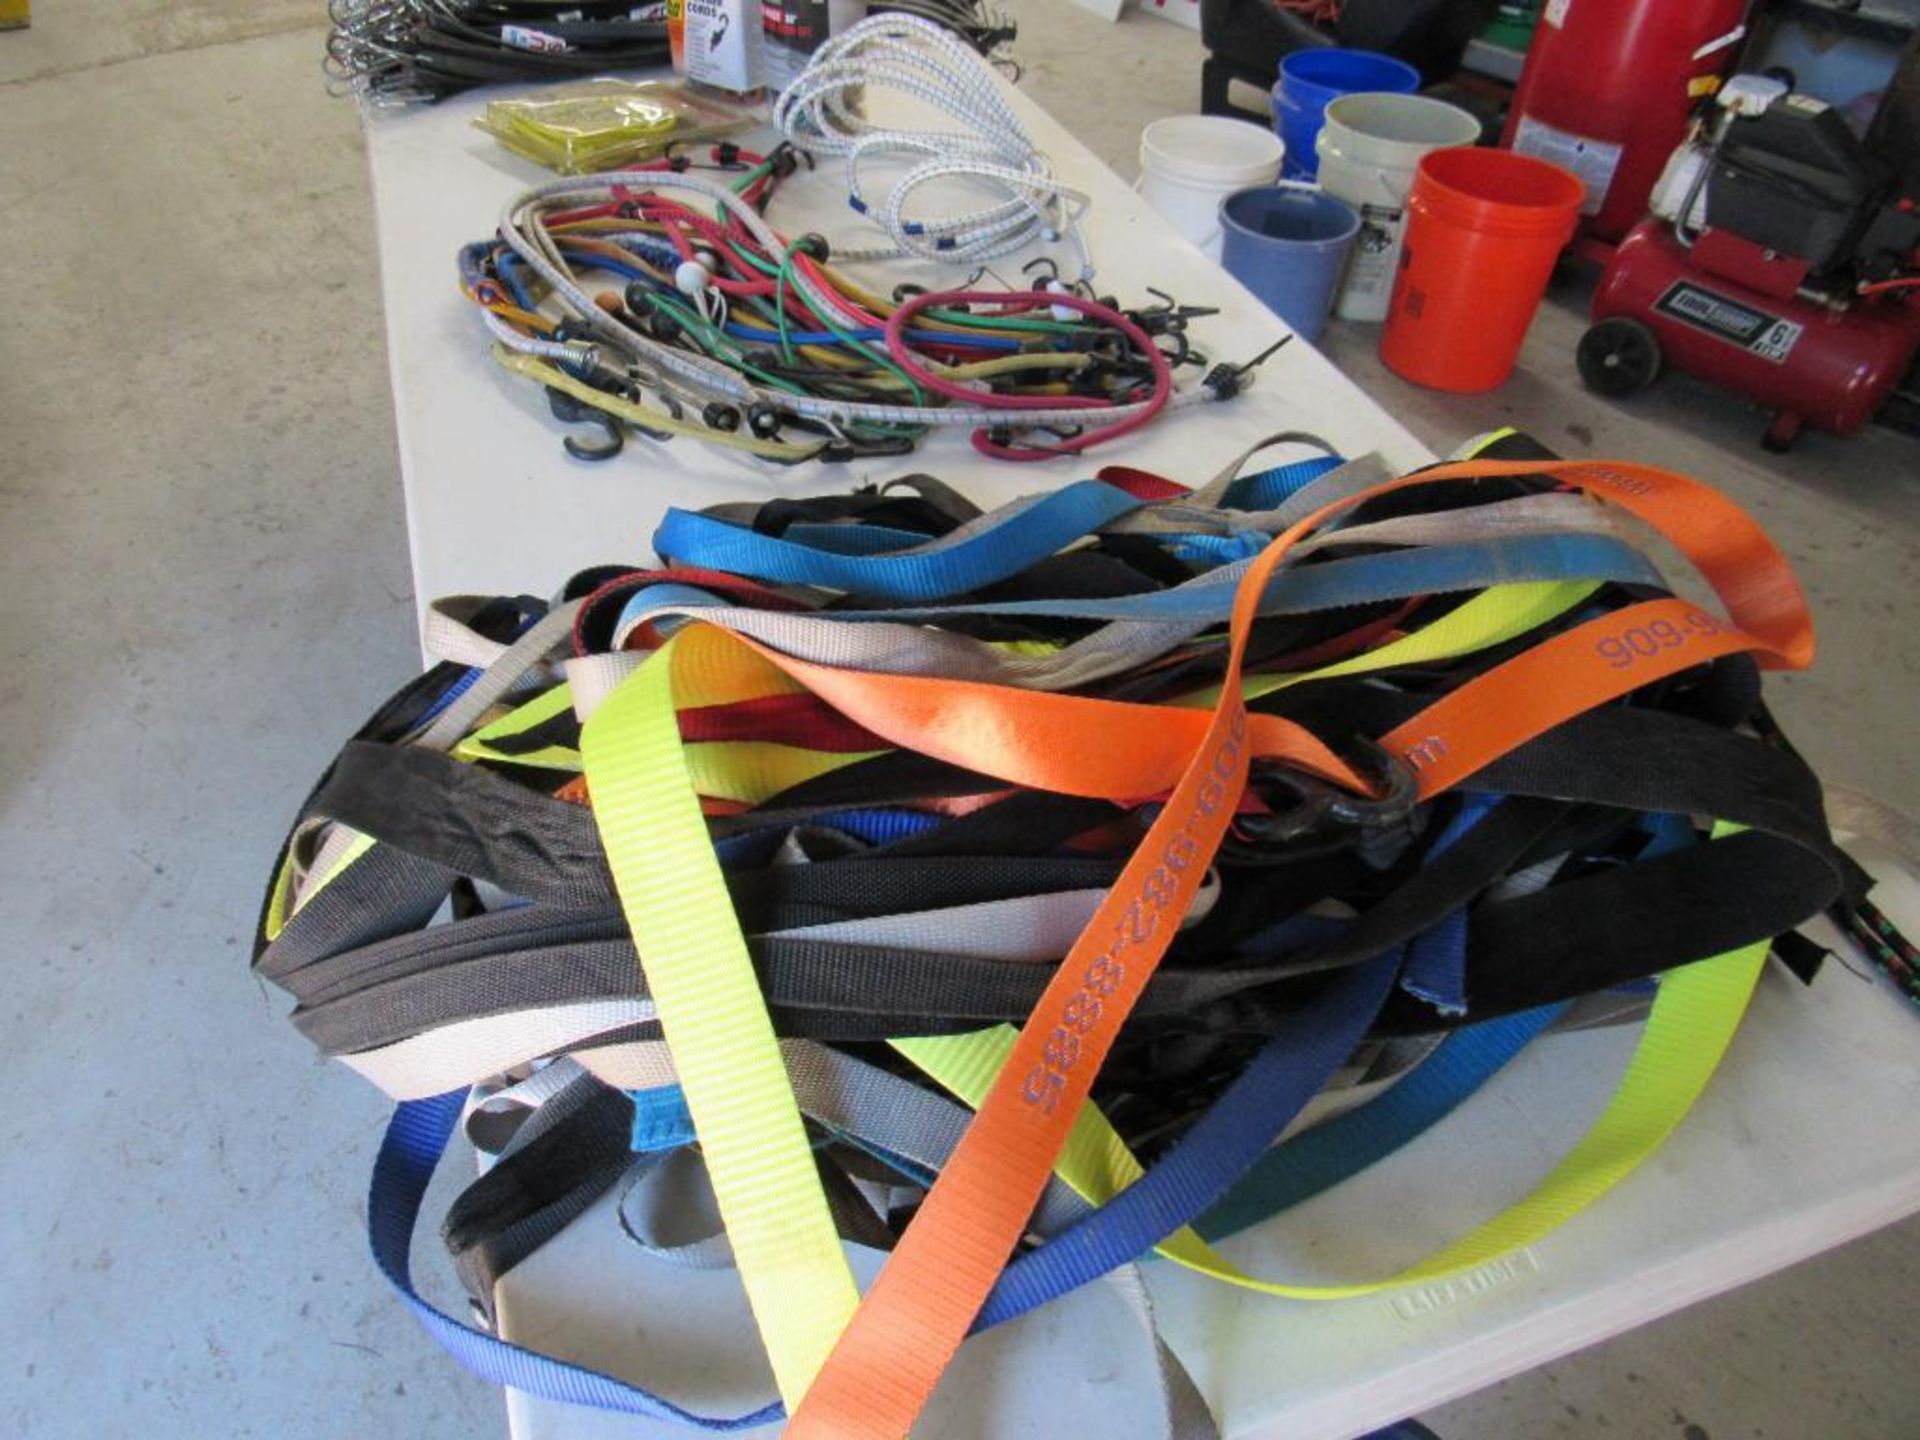 LOT: Large Quantity of Bungee Cords and Straps - Image 6 of 6